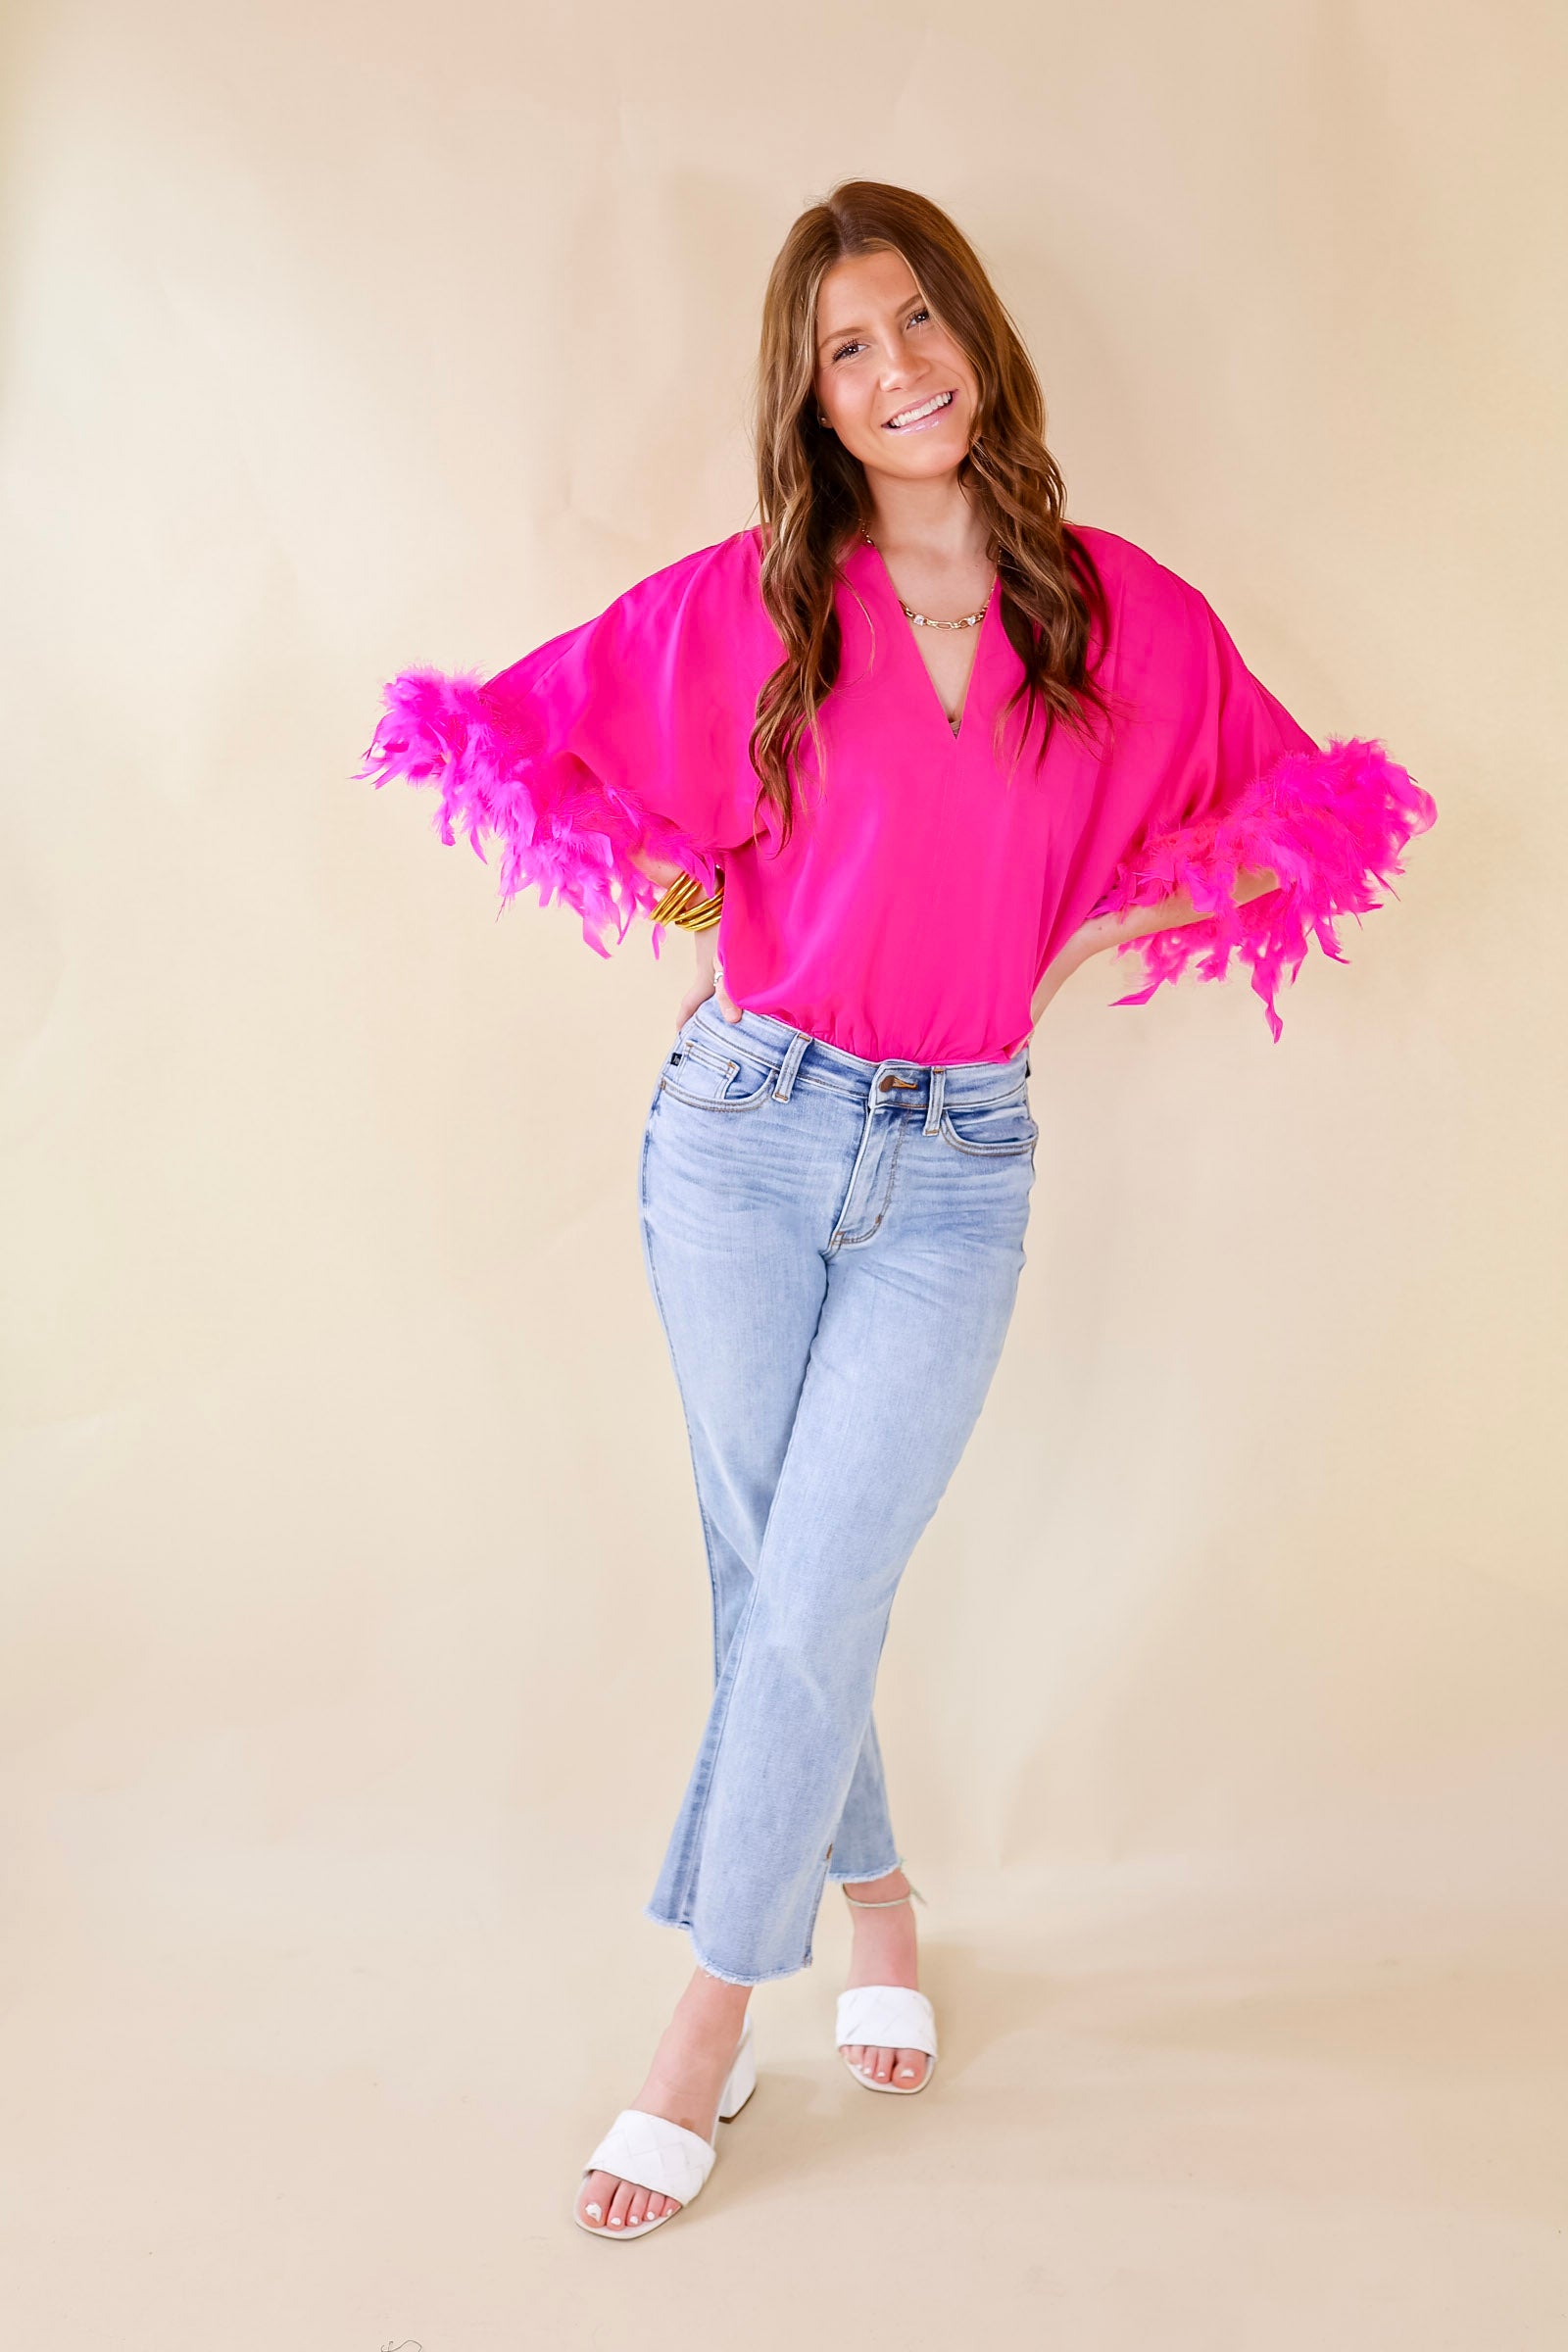 Party Plans V Neck Bodysuit with Feather Sleeves in Fuchsia Pink